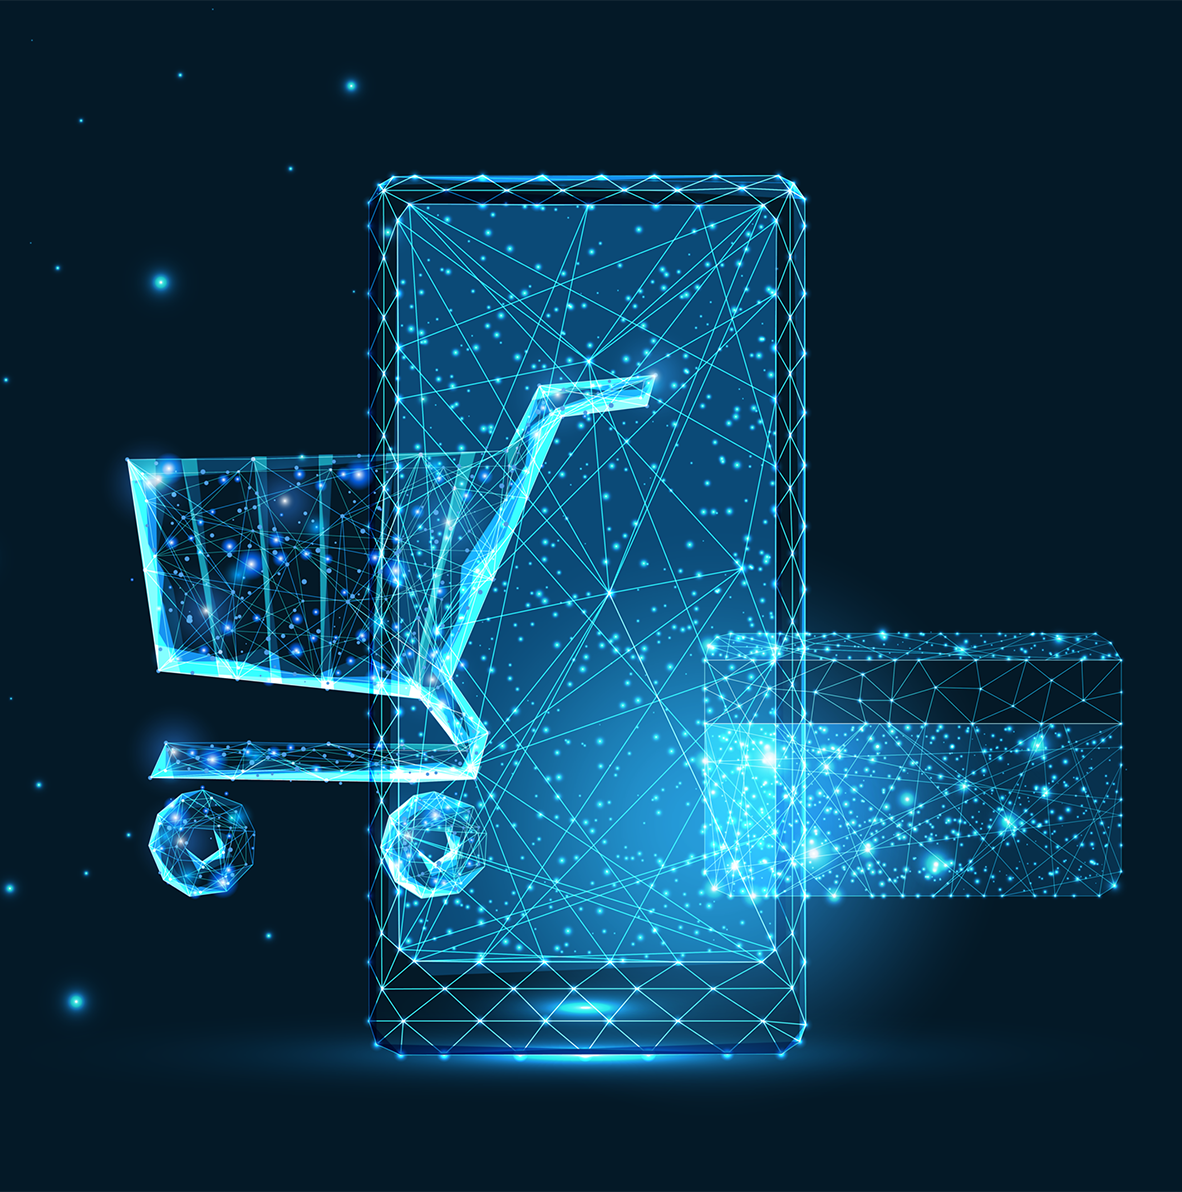 Glowing line art of a shopping cart, mobile phone, and payment card